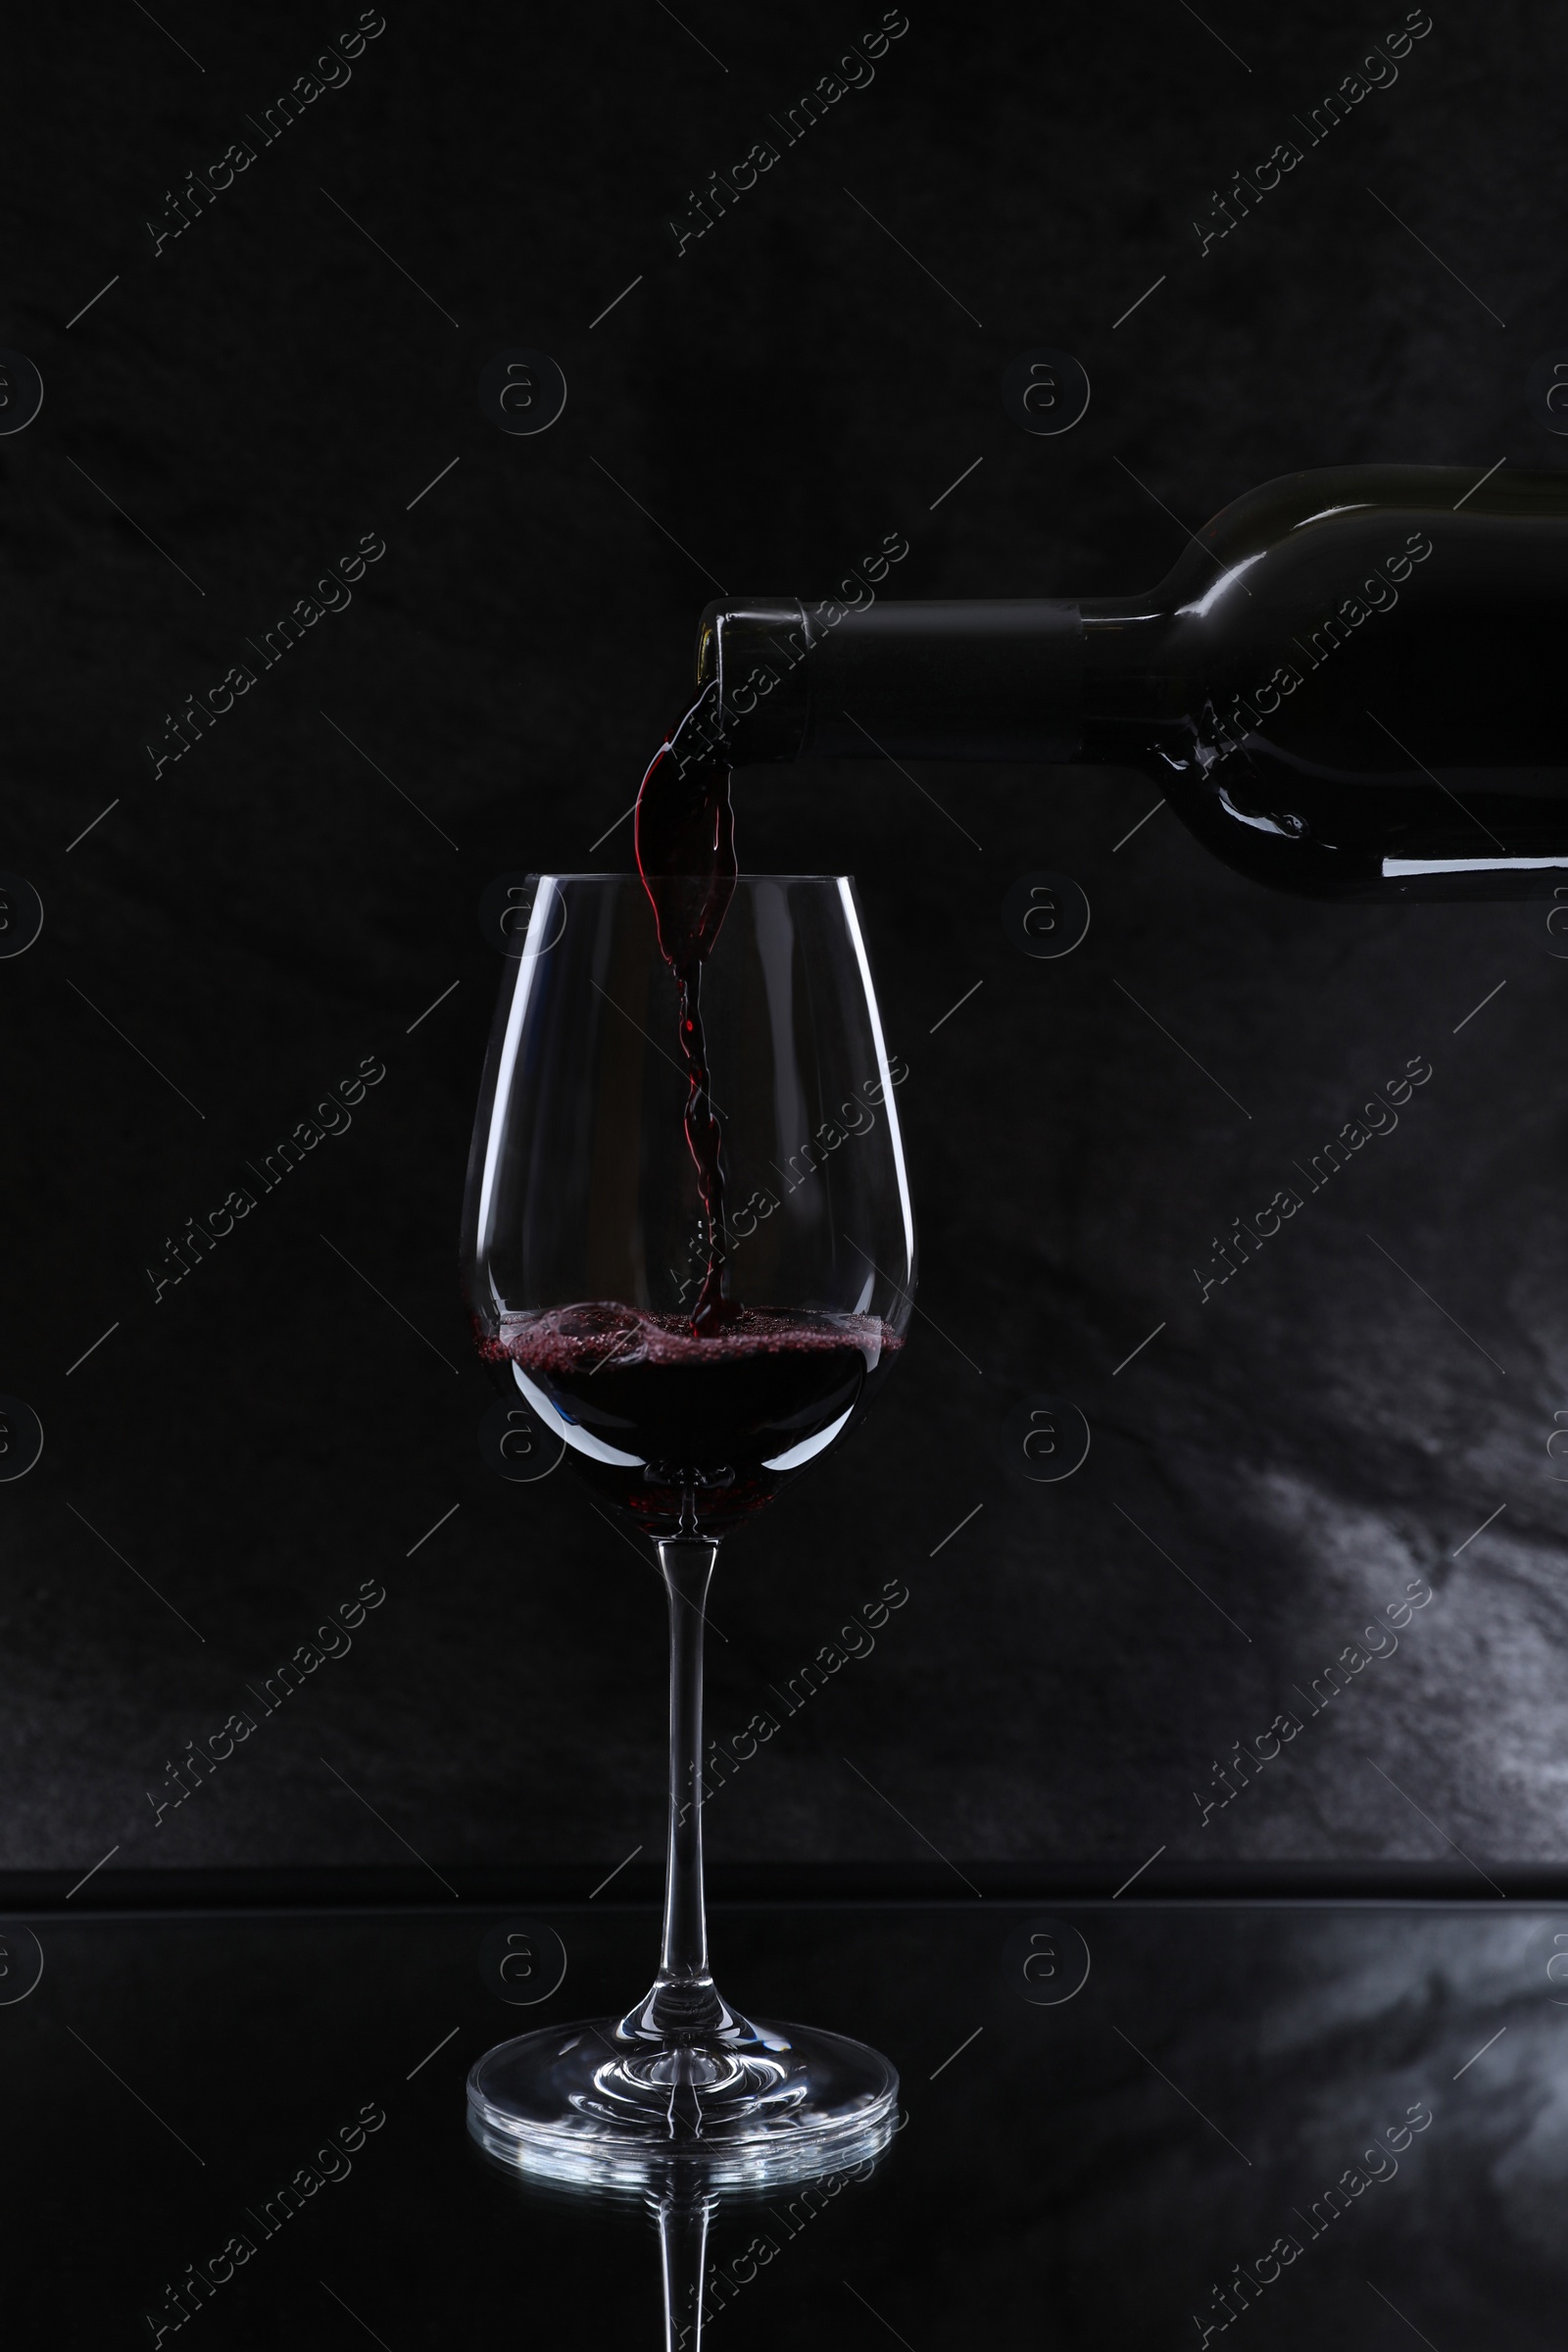 Photo of Pouring red wine from bottle into glass on black background